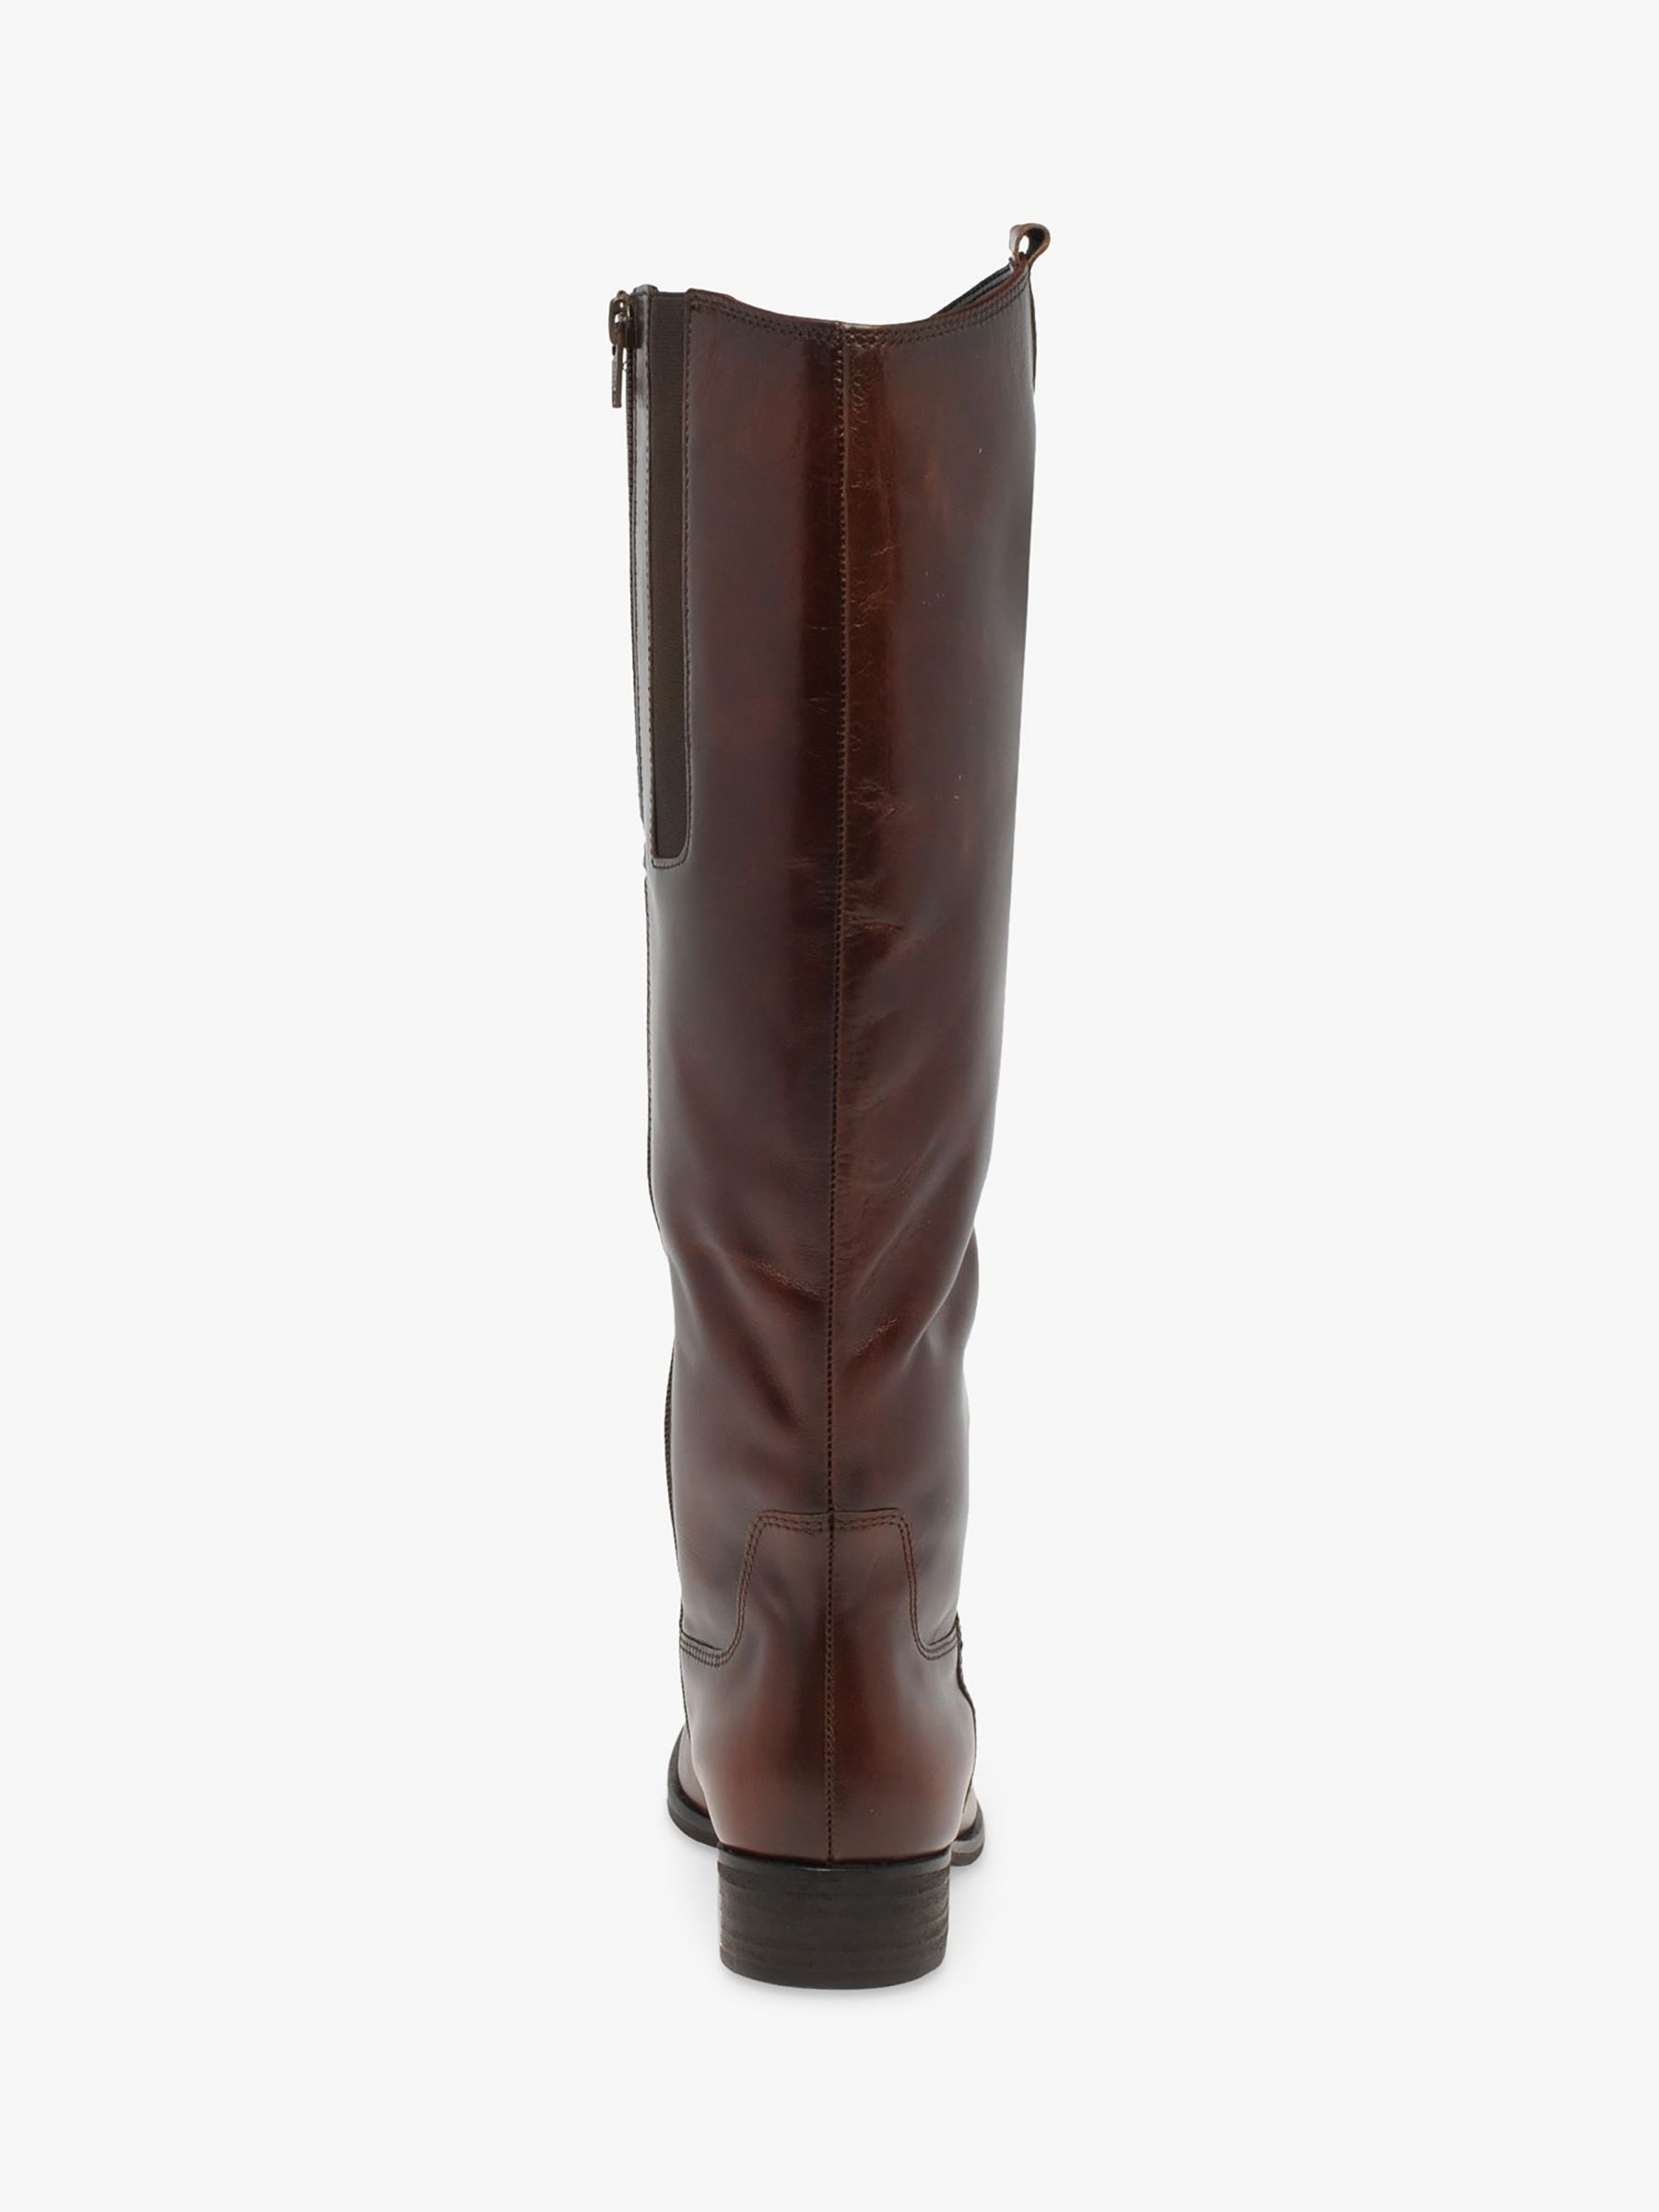 Gabor Brook Medium Length Leather Boots, Sattel at Lewis & Partners